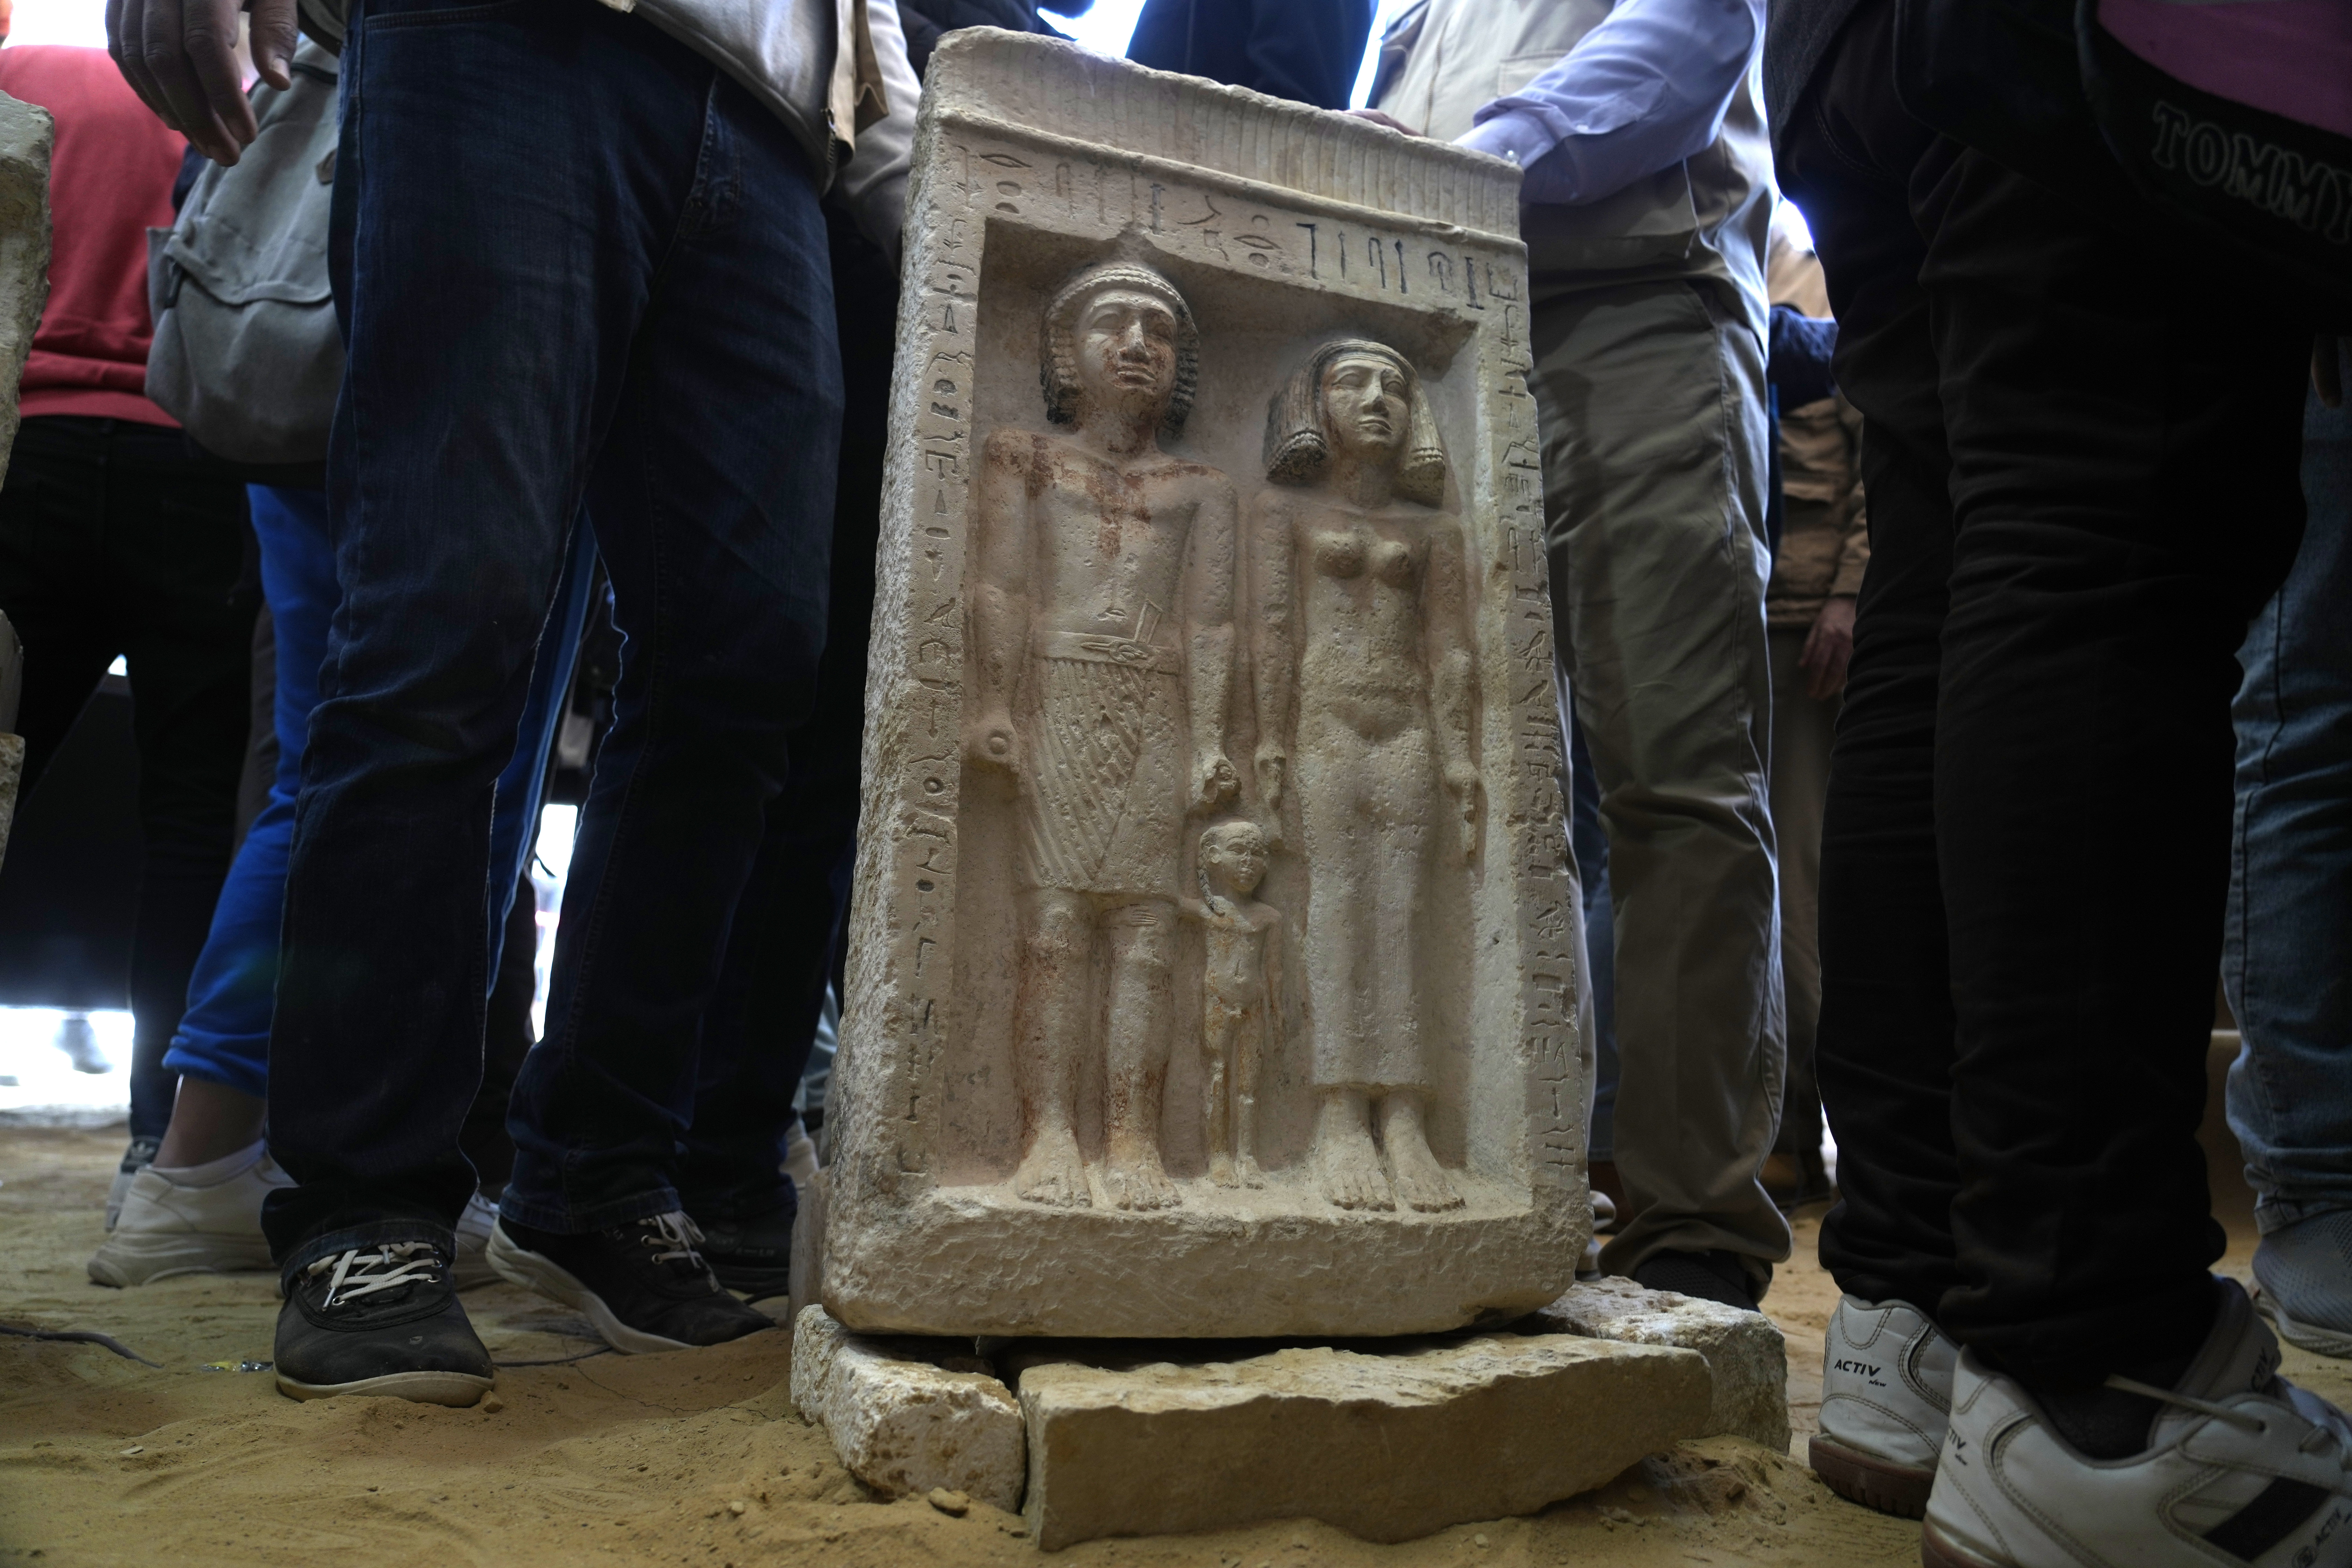 The artifacts, unearthed during a year-long excavation, were found beneath an ancient stone enclosure near the Saqqara pyramids (AP Photo/Amr Nabil)